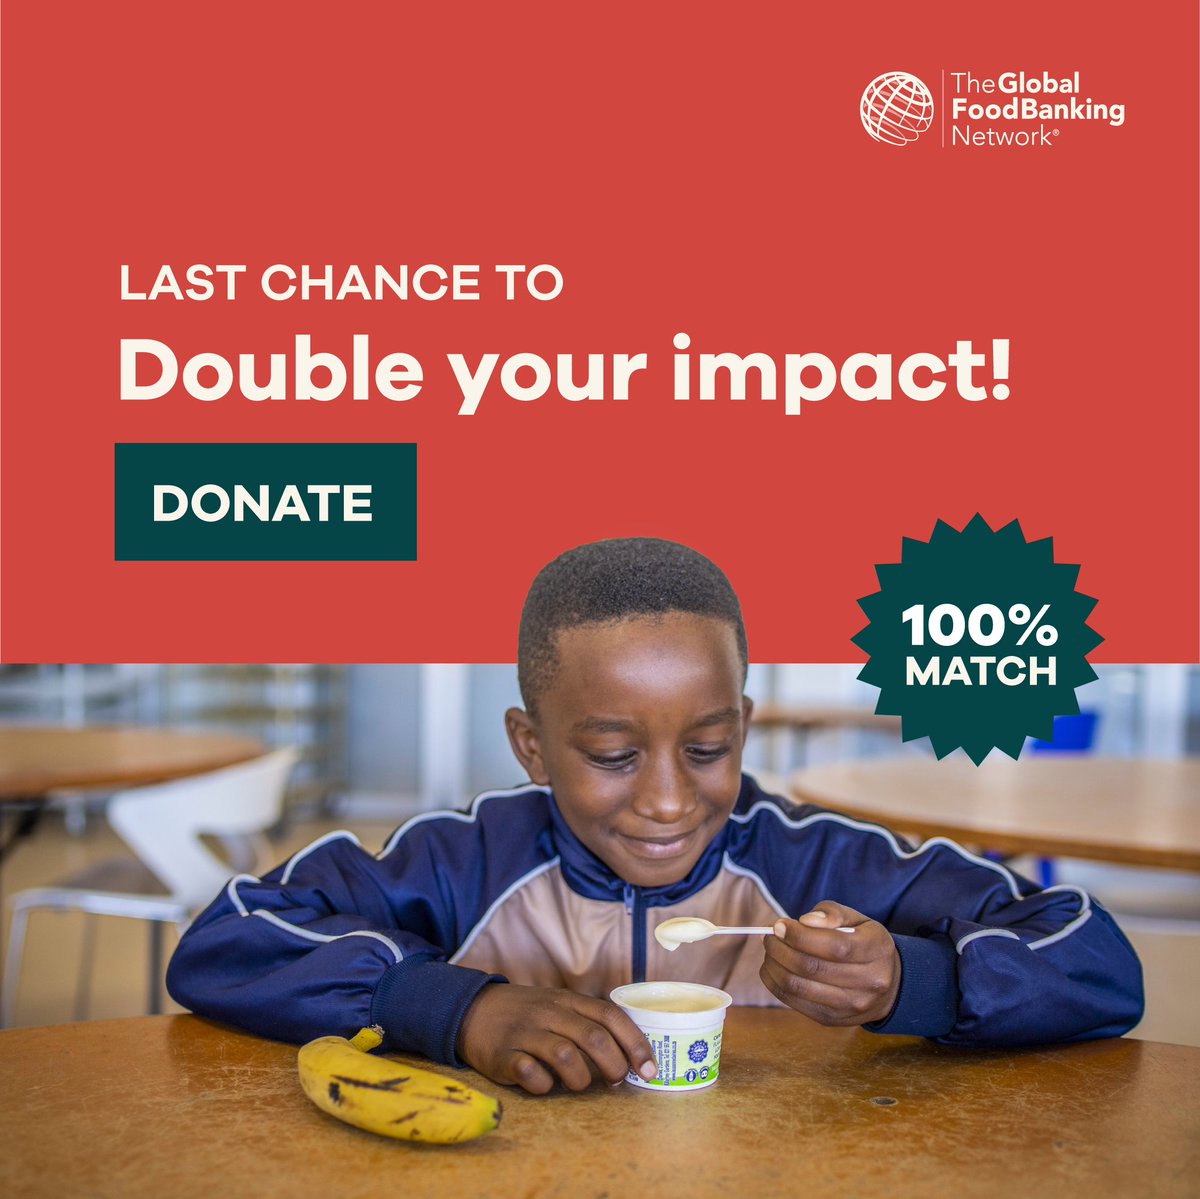 Don’t forget! 💛 Your gift to GFN is a catalyst for change across six continents and more than 50 countries! Help us sustainably alleviate hunger. Donate by April 15th and your gift will be matched 100%! Donate today: bit.ly/3IY8fZu